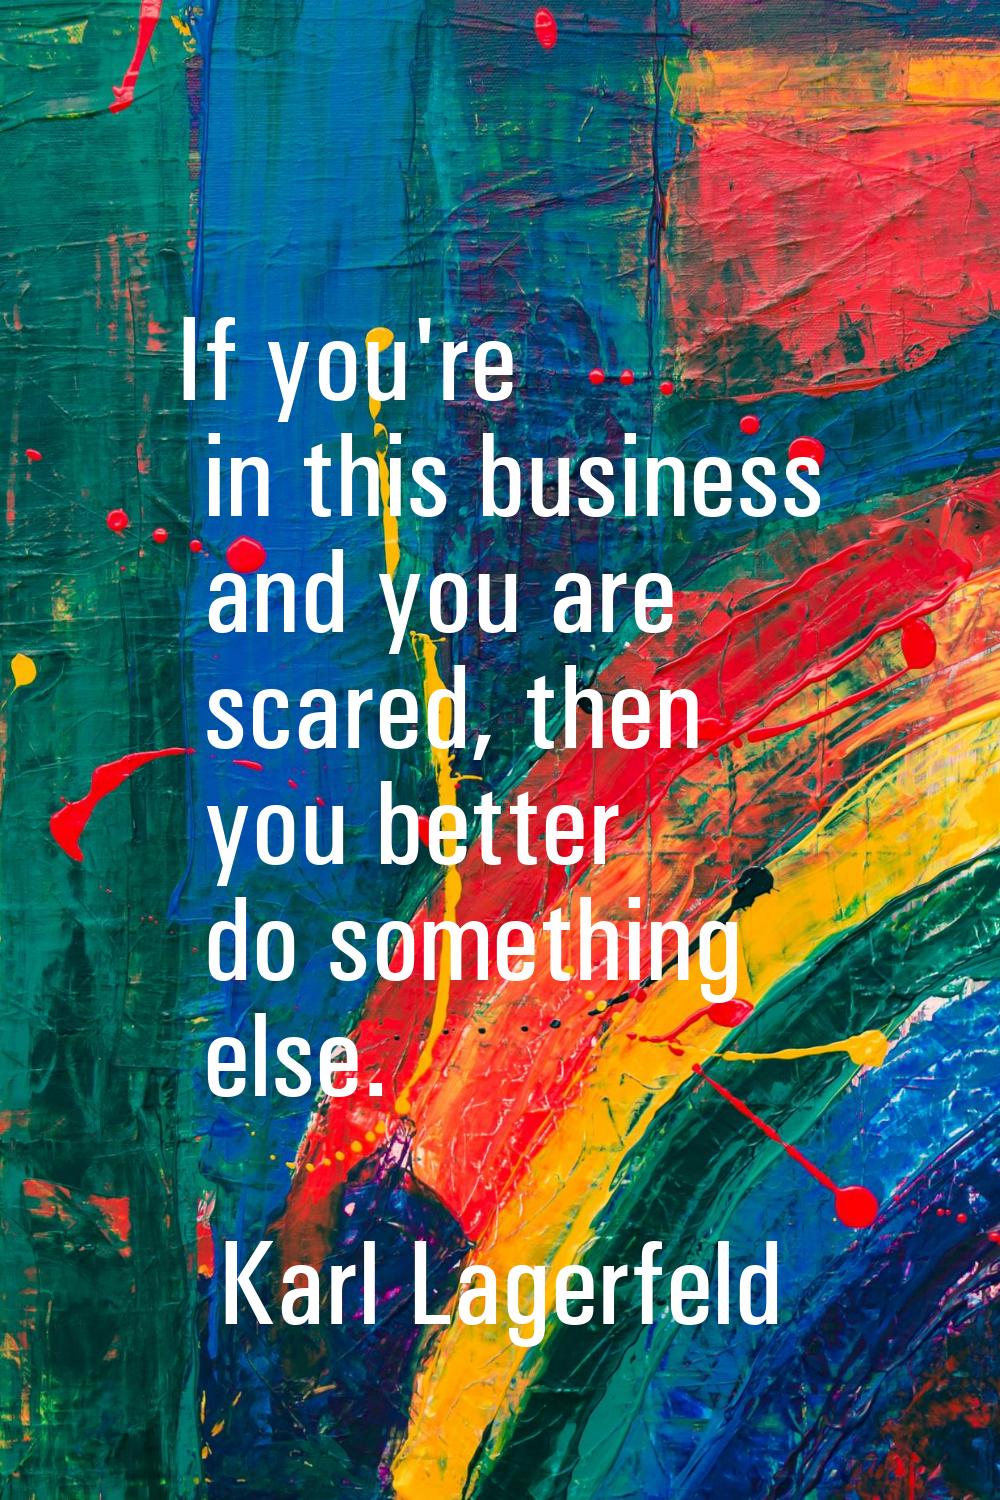 If you're in this business and you are scared, then you better do something else.